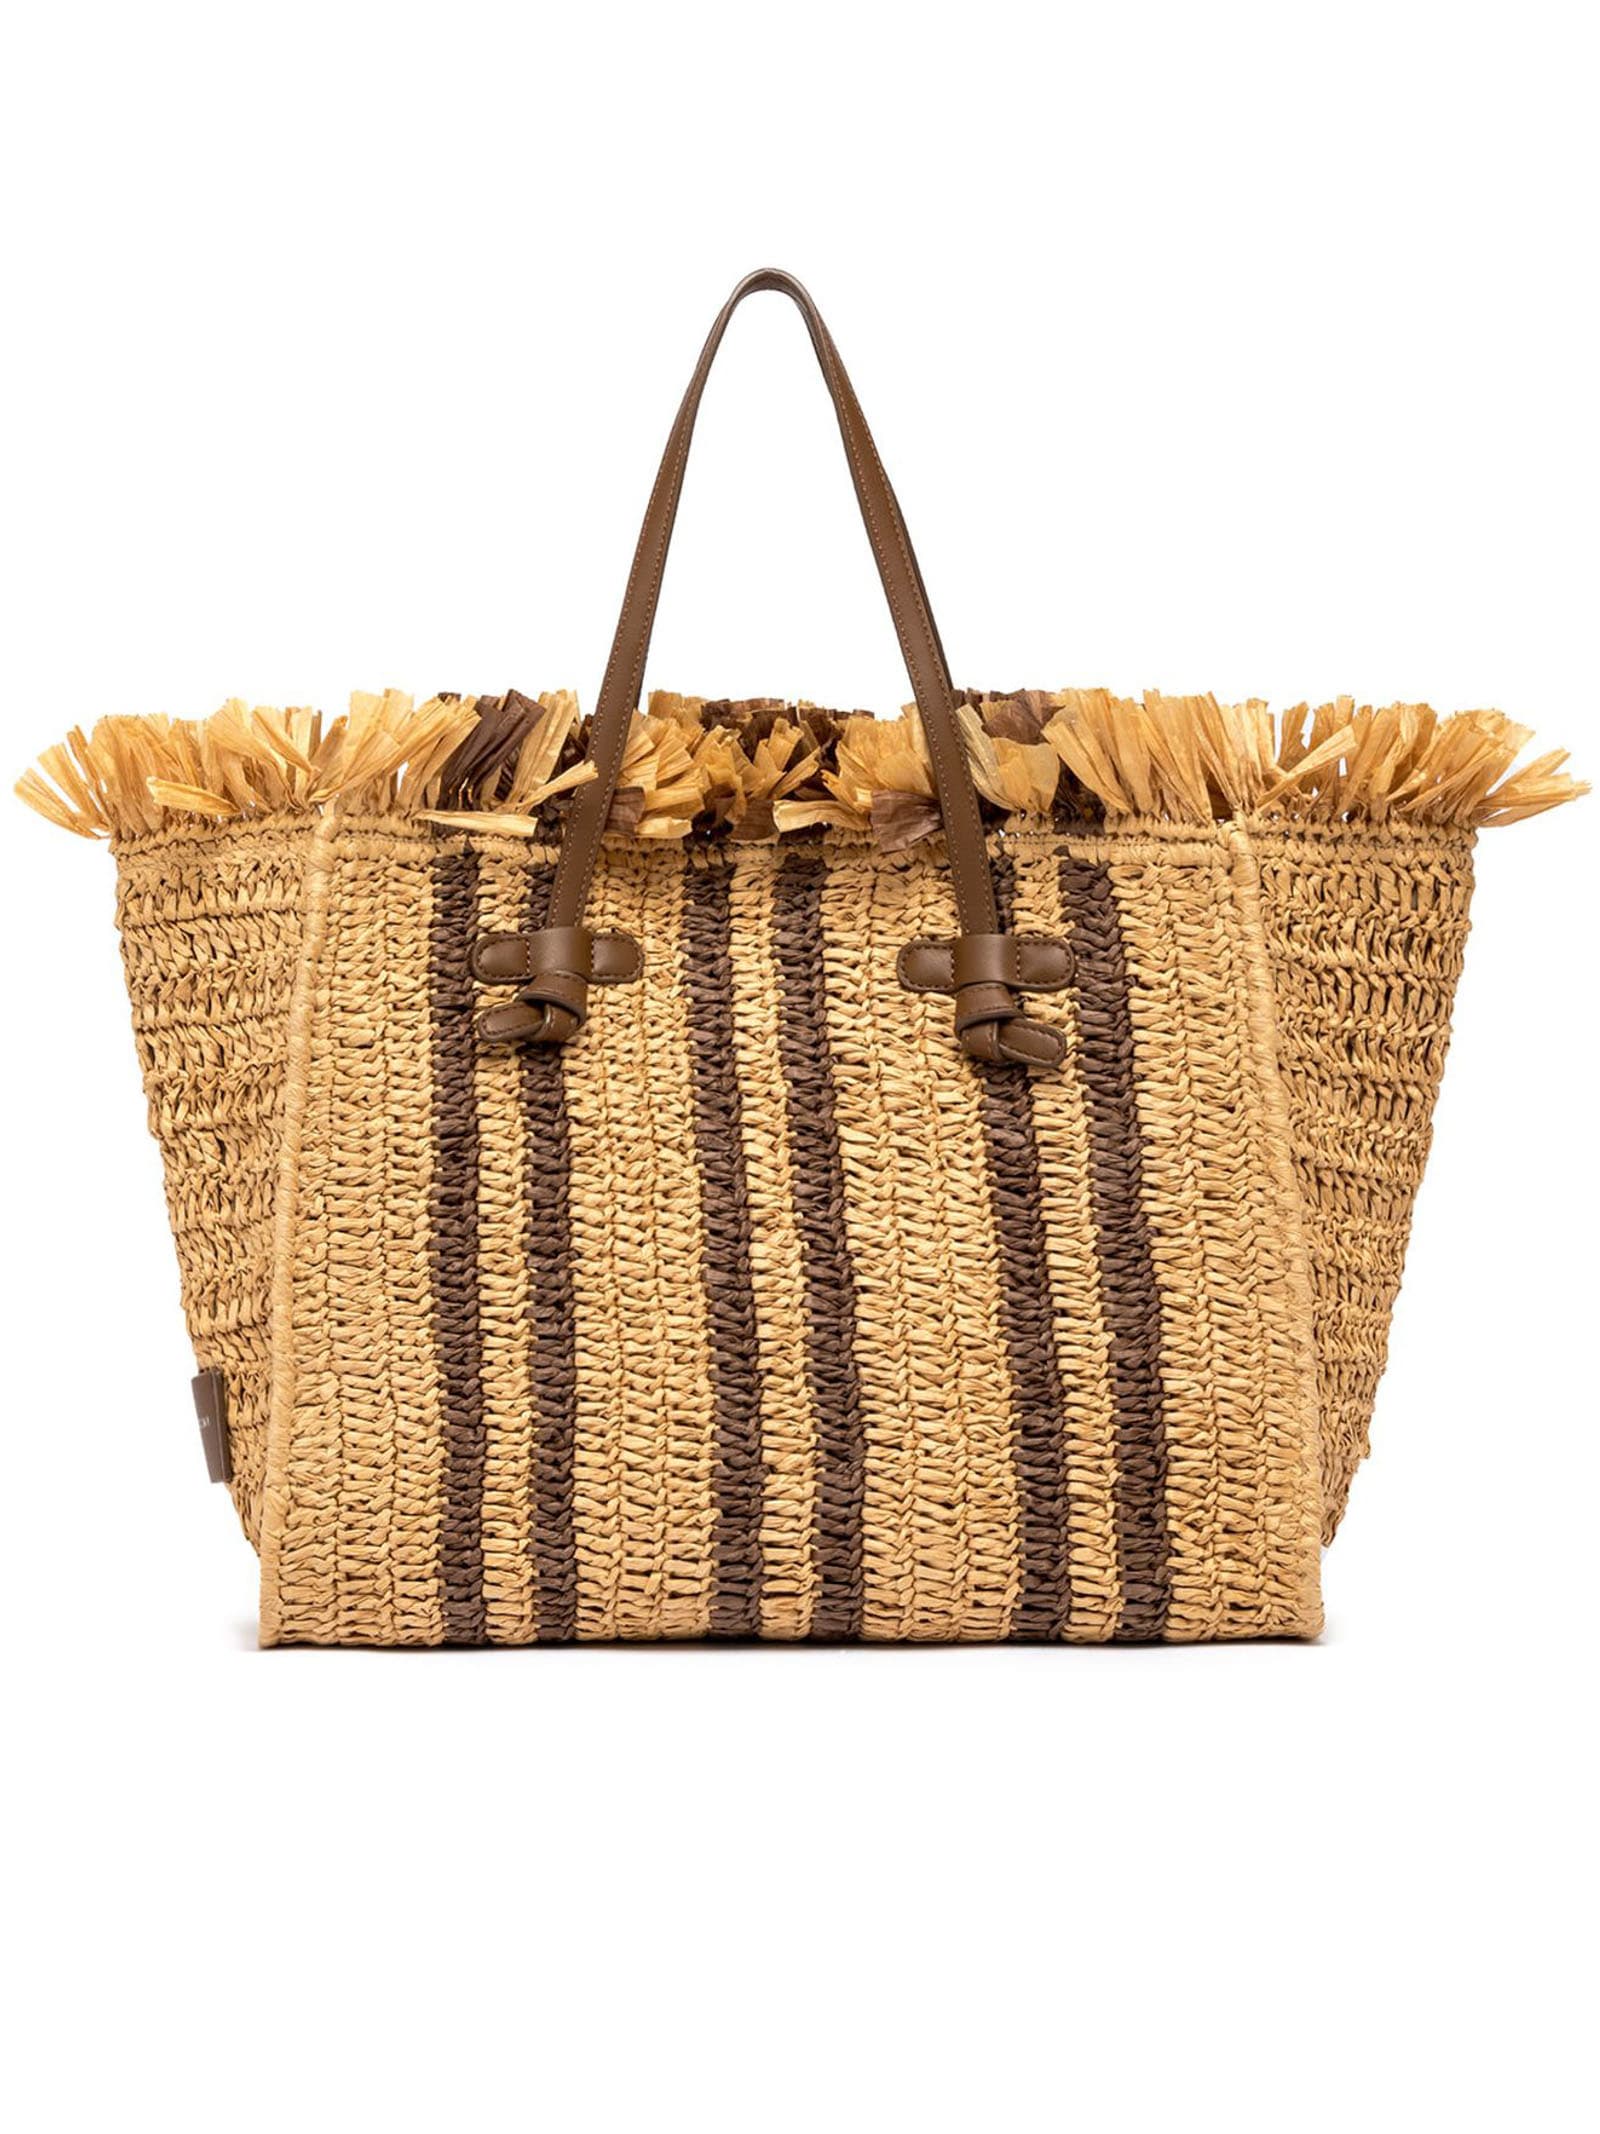 Gianni Chiarini Shopping Bag Is Made Of Straw-effect Material - Brown - female - Size: 0one size